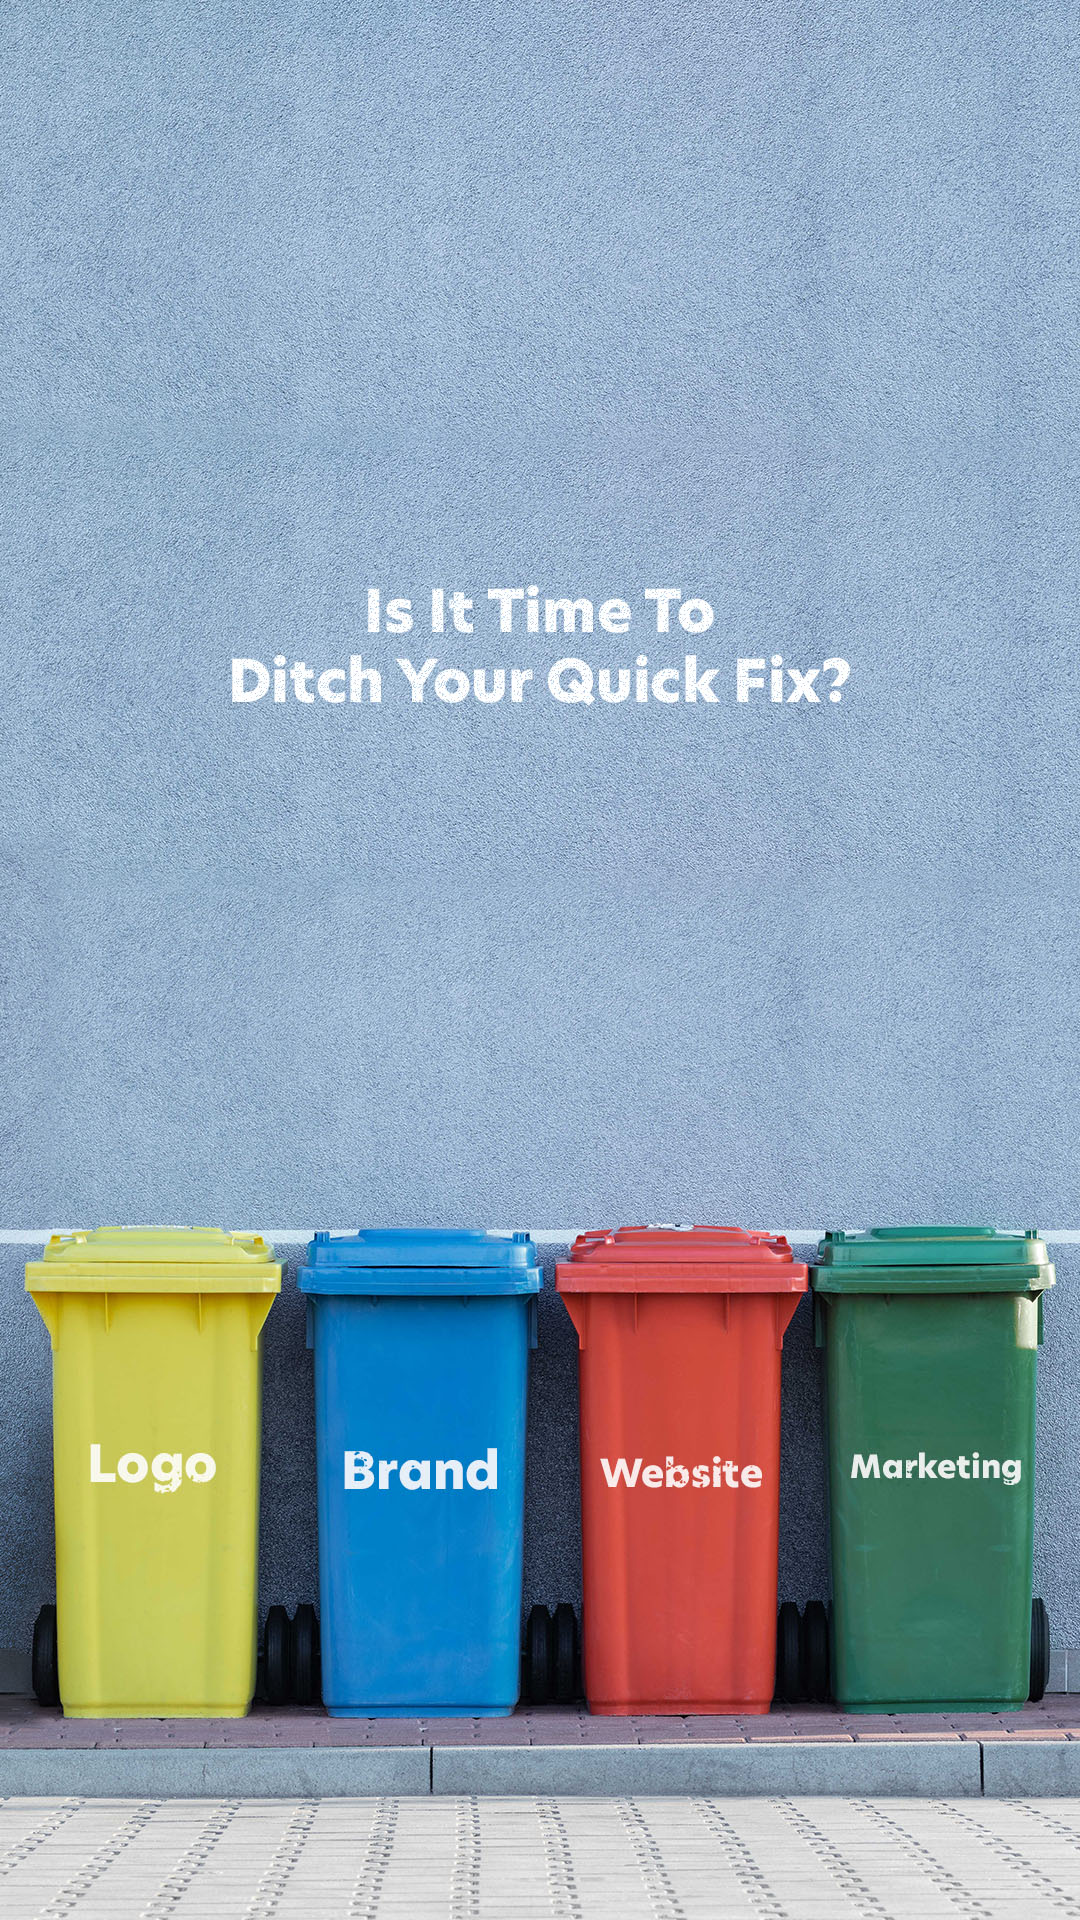 Four different trashcans labelled: logo, brand, website, and marketing